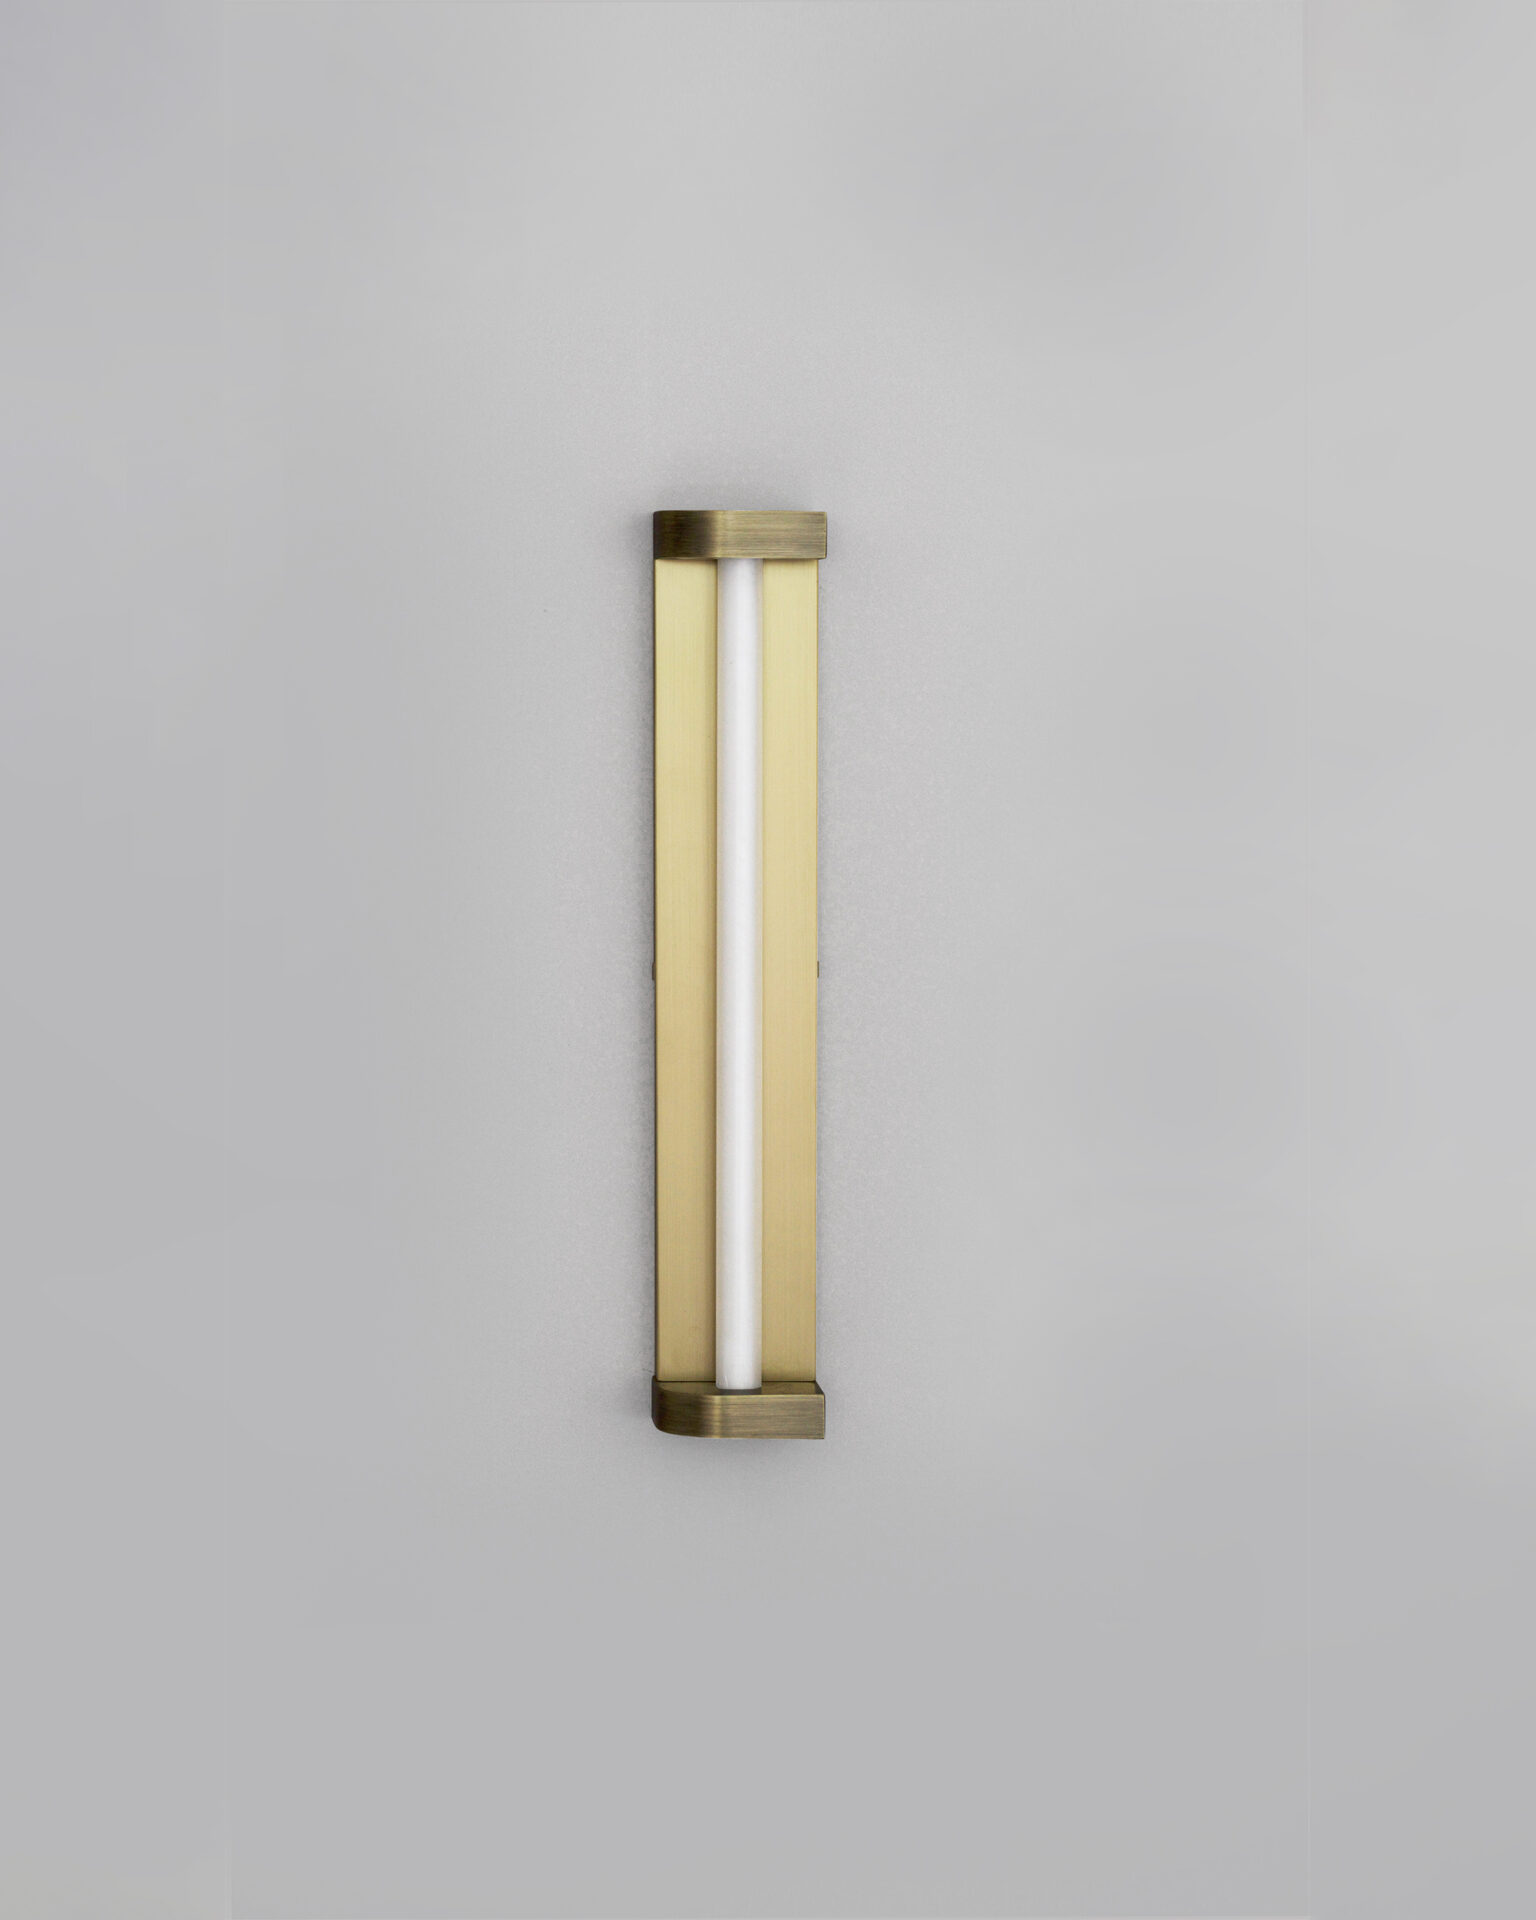 Square in Circle_Rounded Corner Wall Light_Lighting_Studio Fenice_